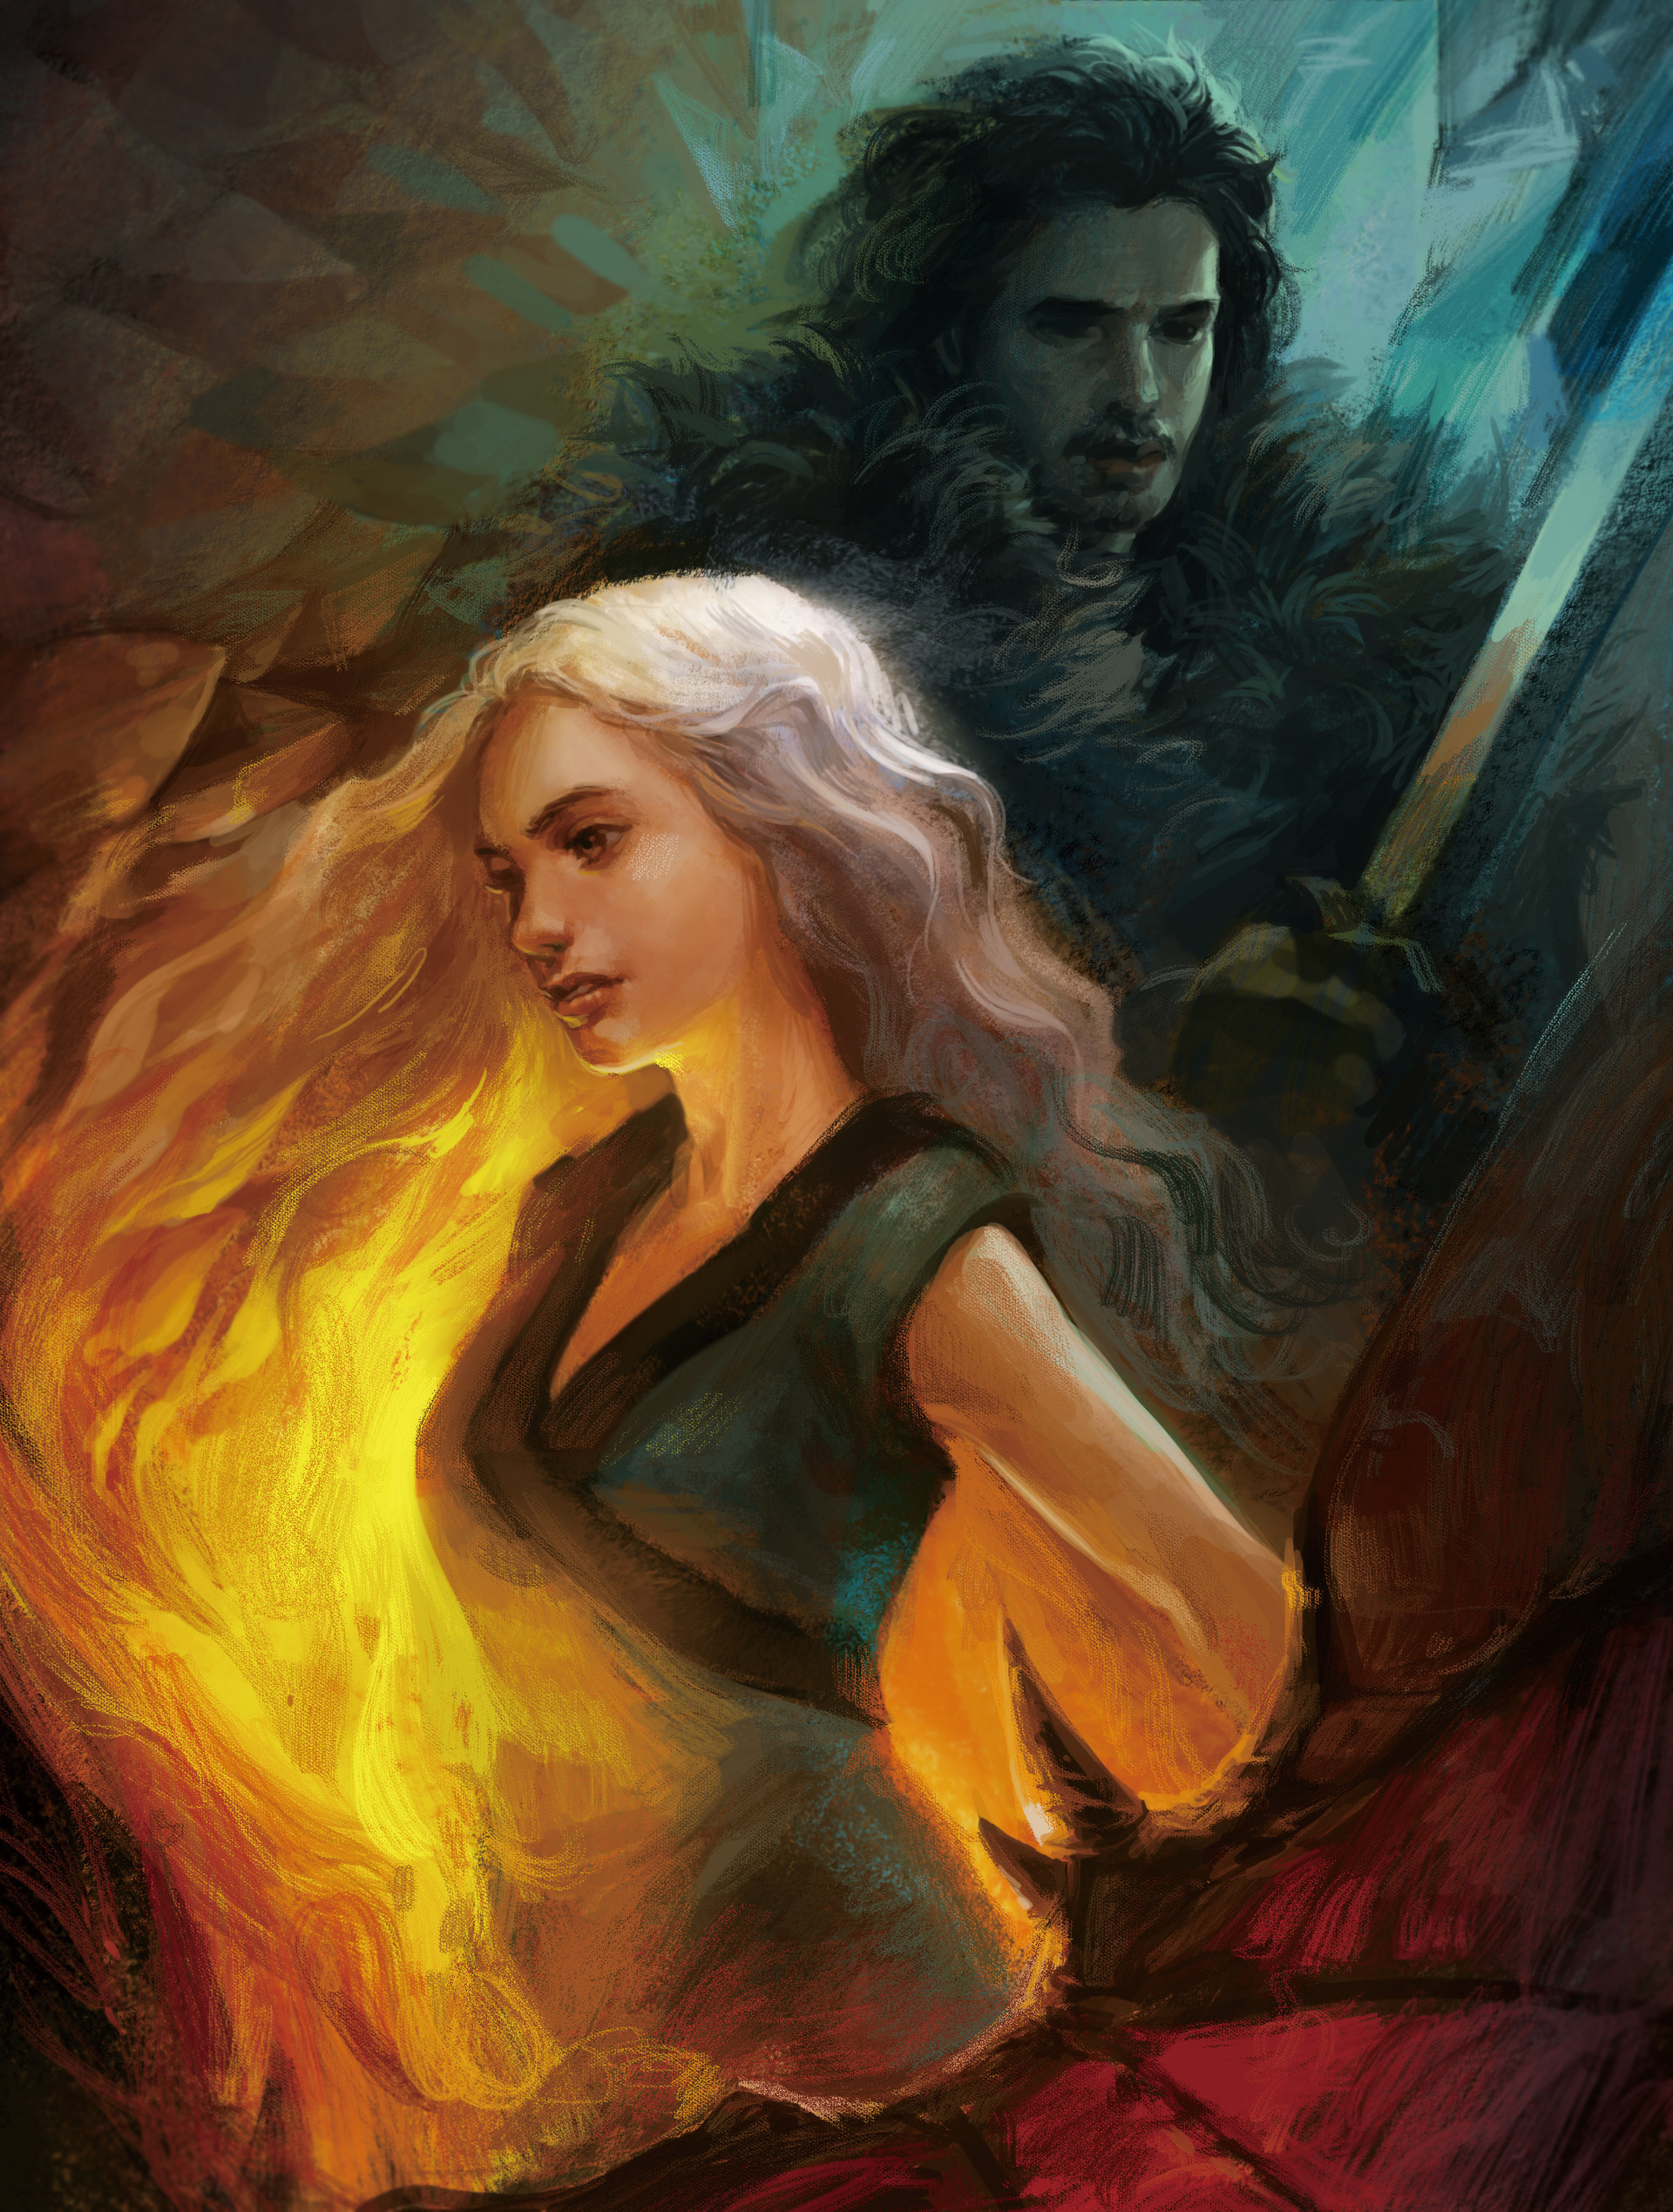 Fan Art of Game of Throne.